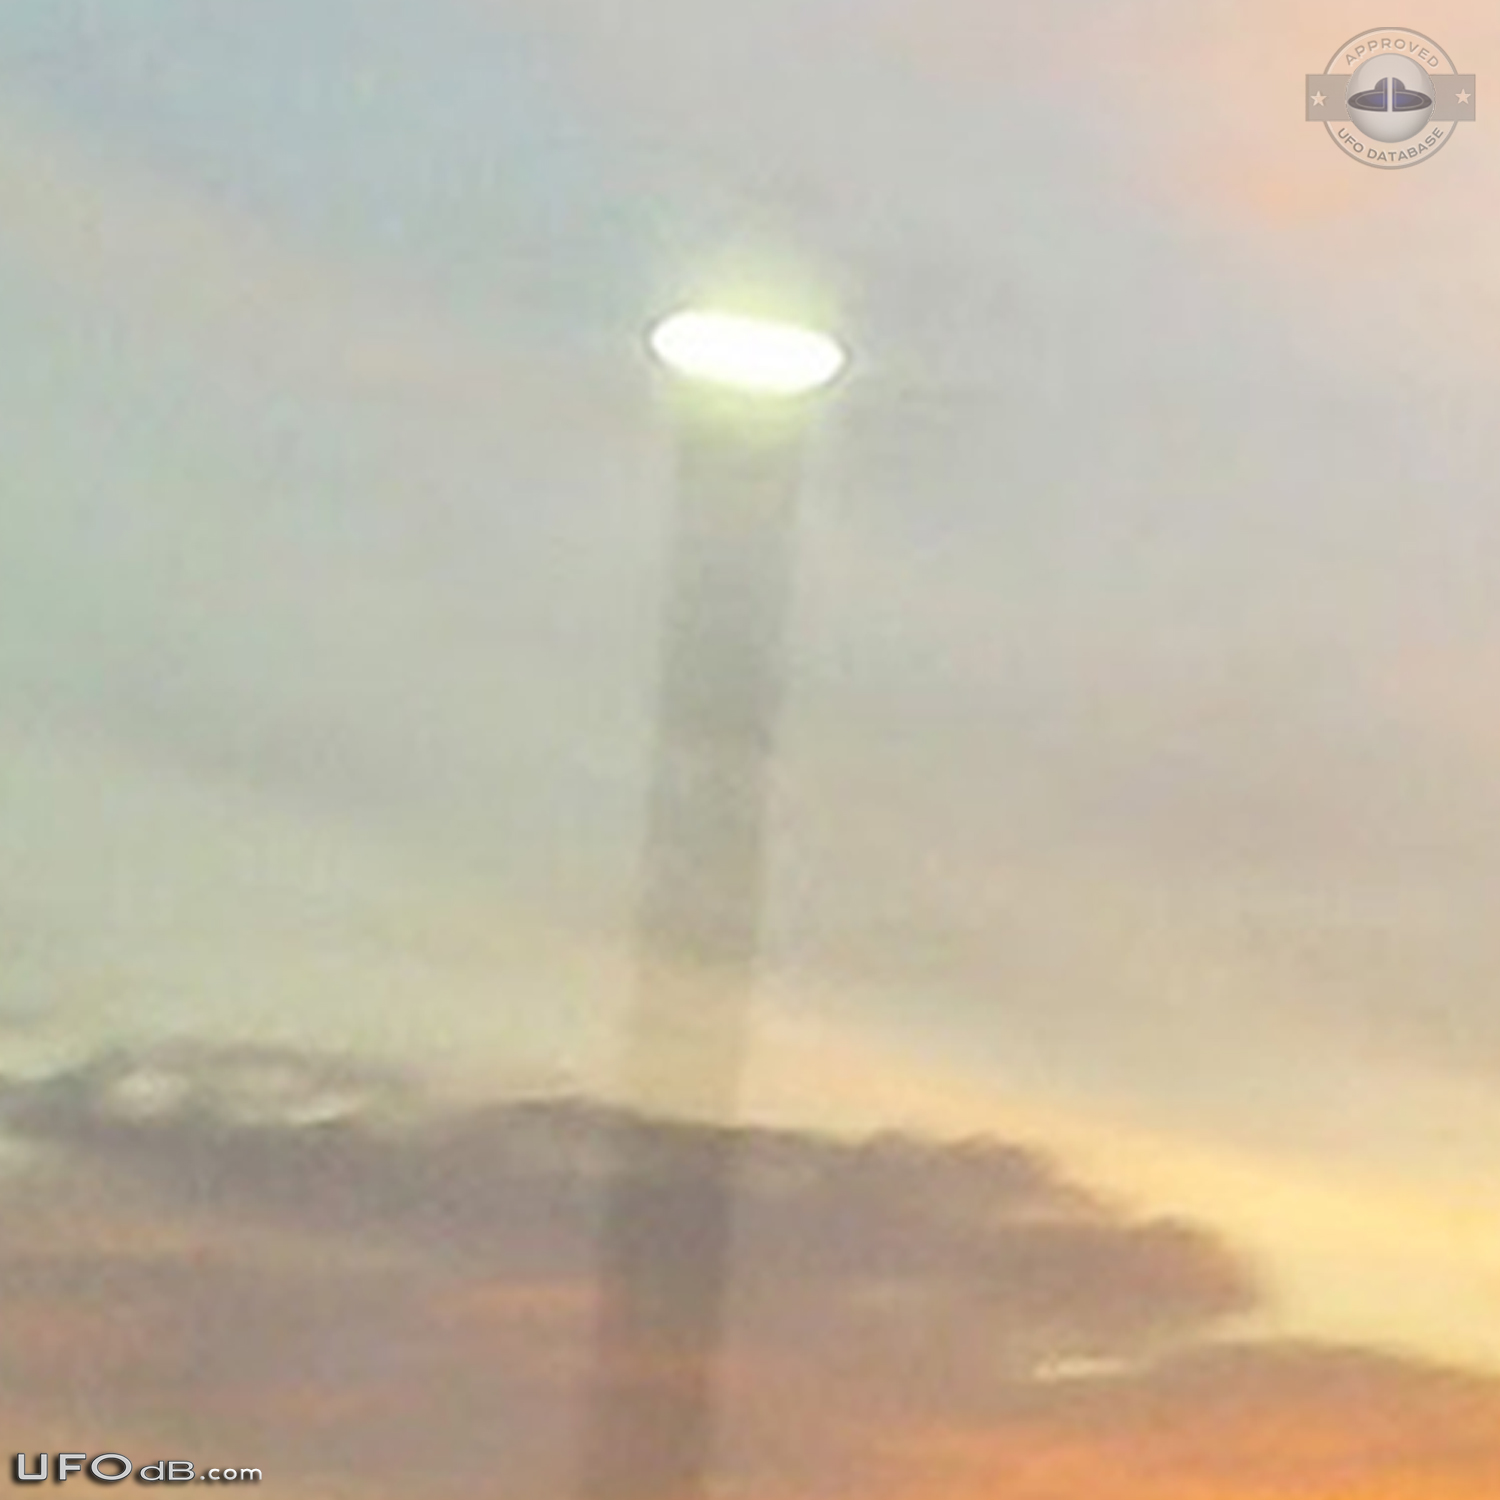 UFO saucer caught from car in Cottonwood California USA 2014 UFO Picture #589-4